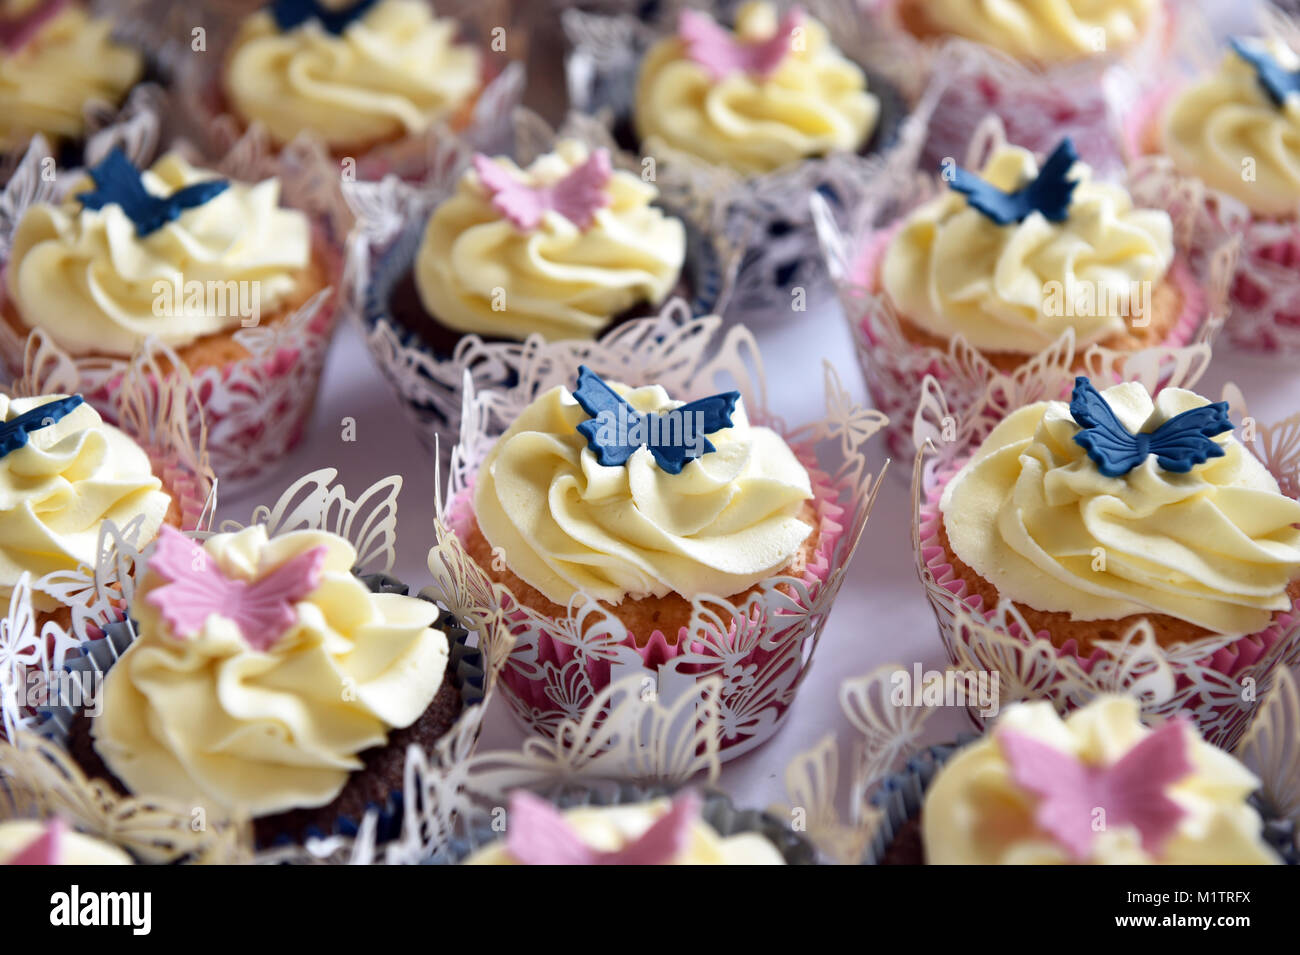 Butterfly cupcakes with white icing at a wedding reception Stock Photo